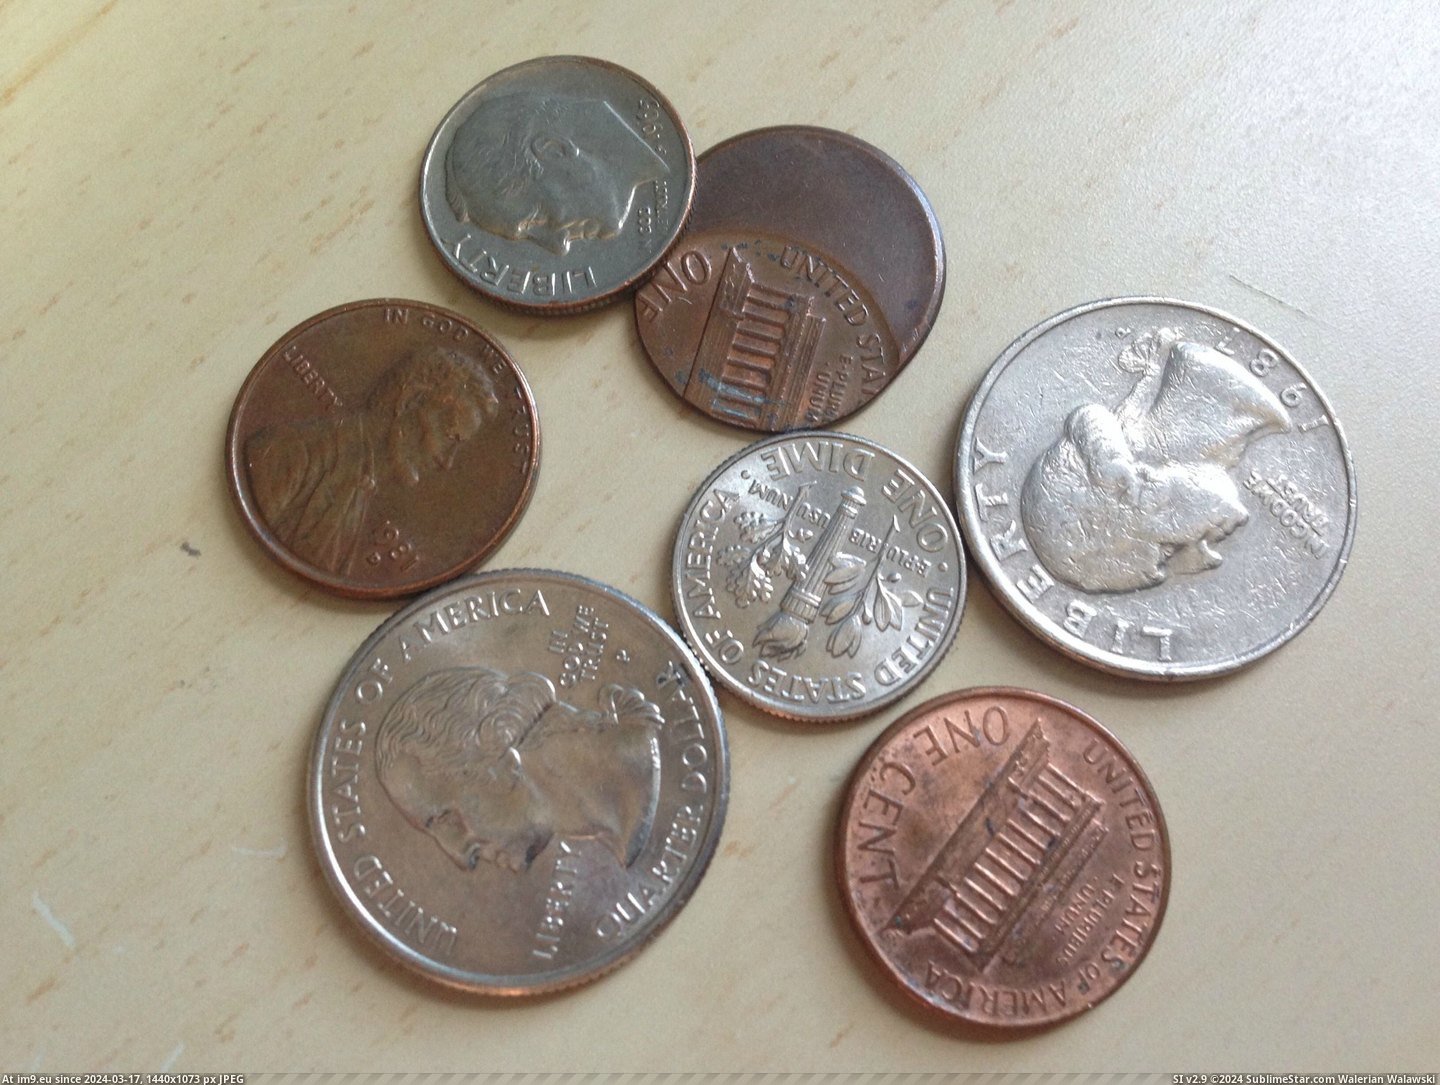 #Was #Out #Noticed #Odd #Pocket #Change #Loose [Pics] Was taking loose change out of my pocket when I noticed something odd Pic. (Изображение из альбом My r/PICS favs))